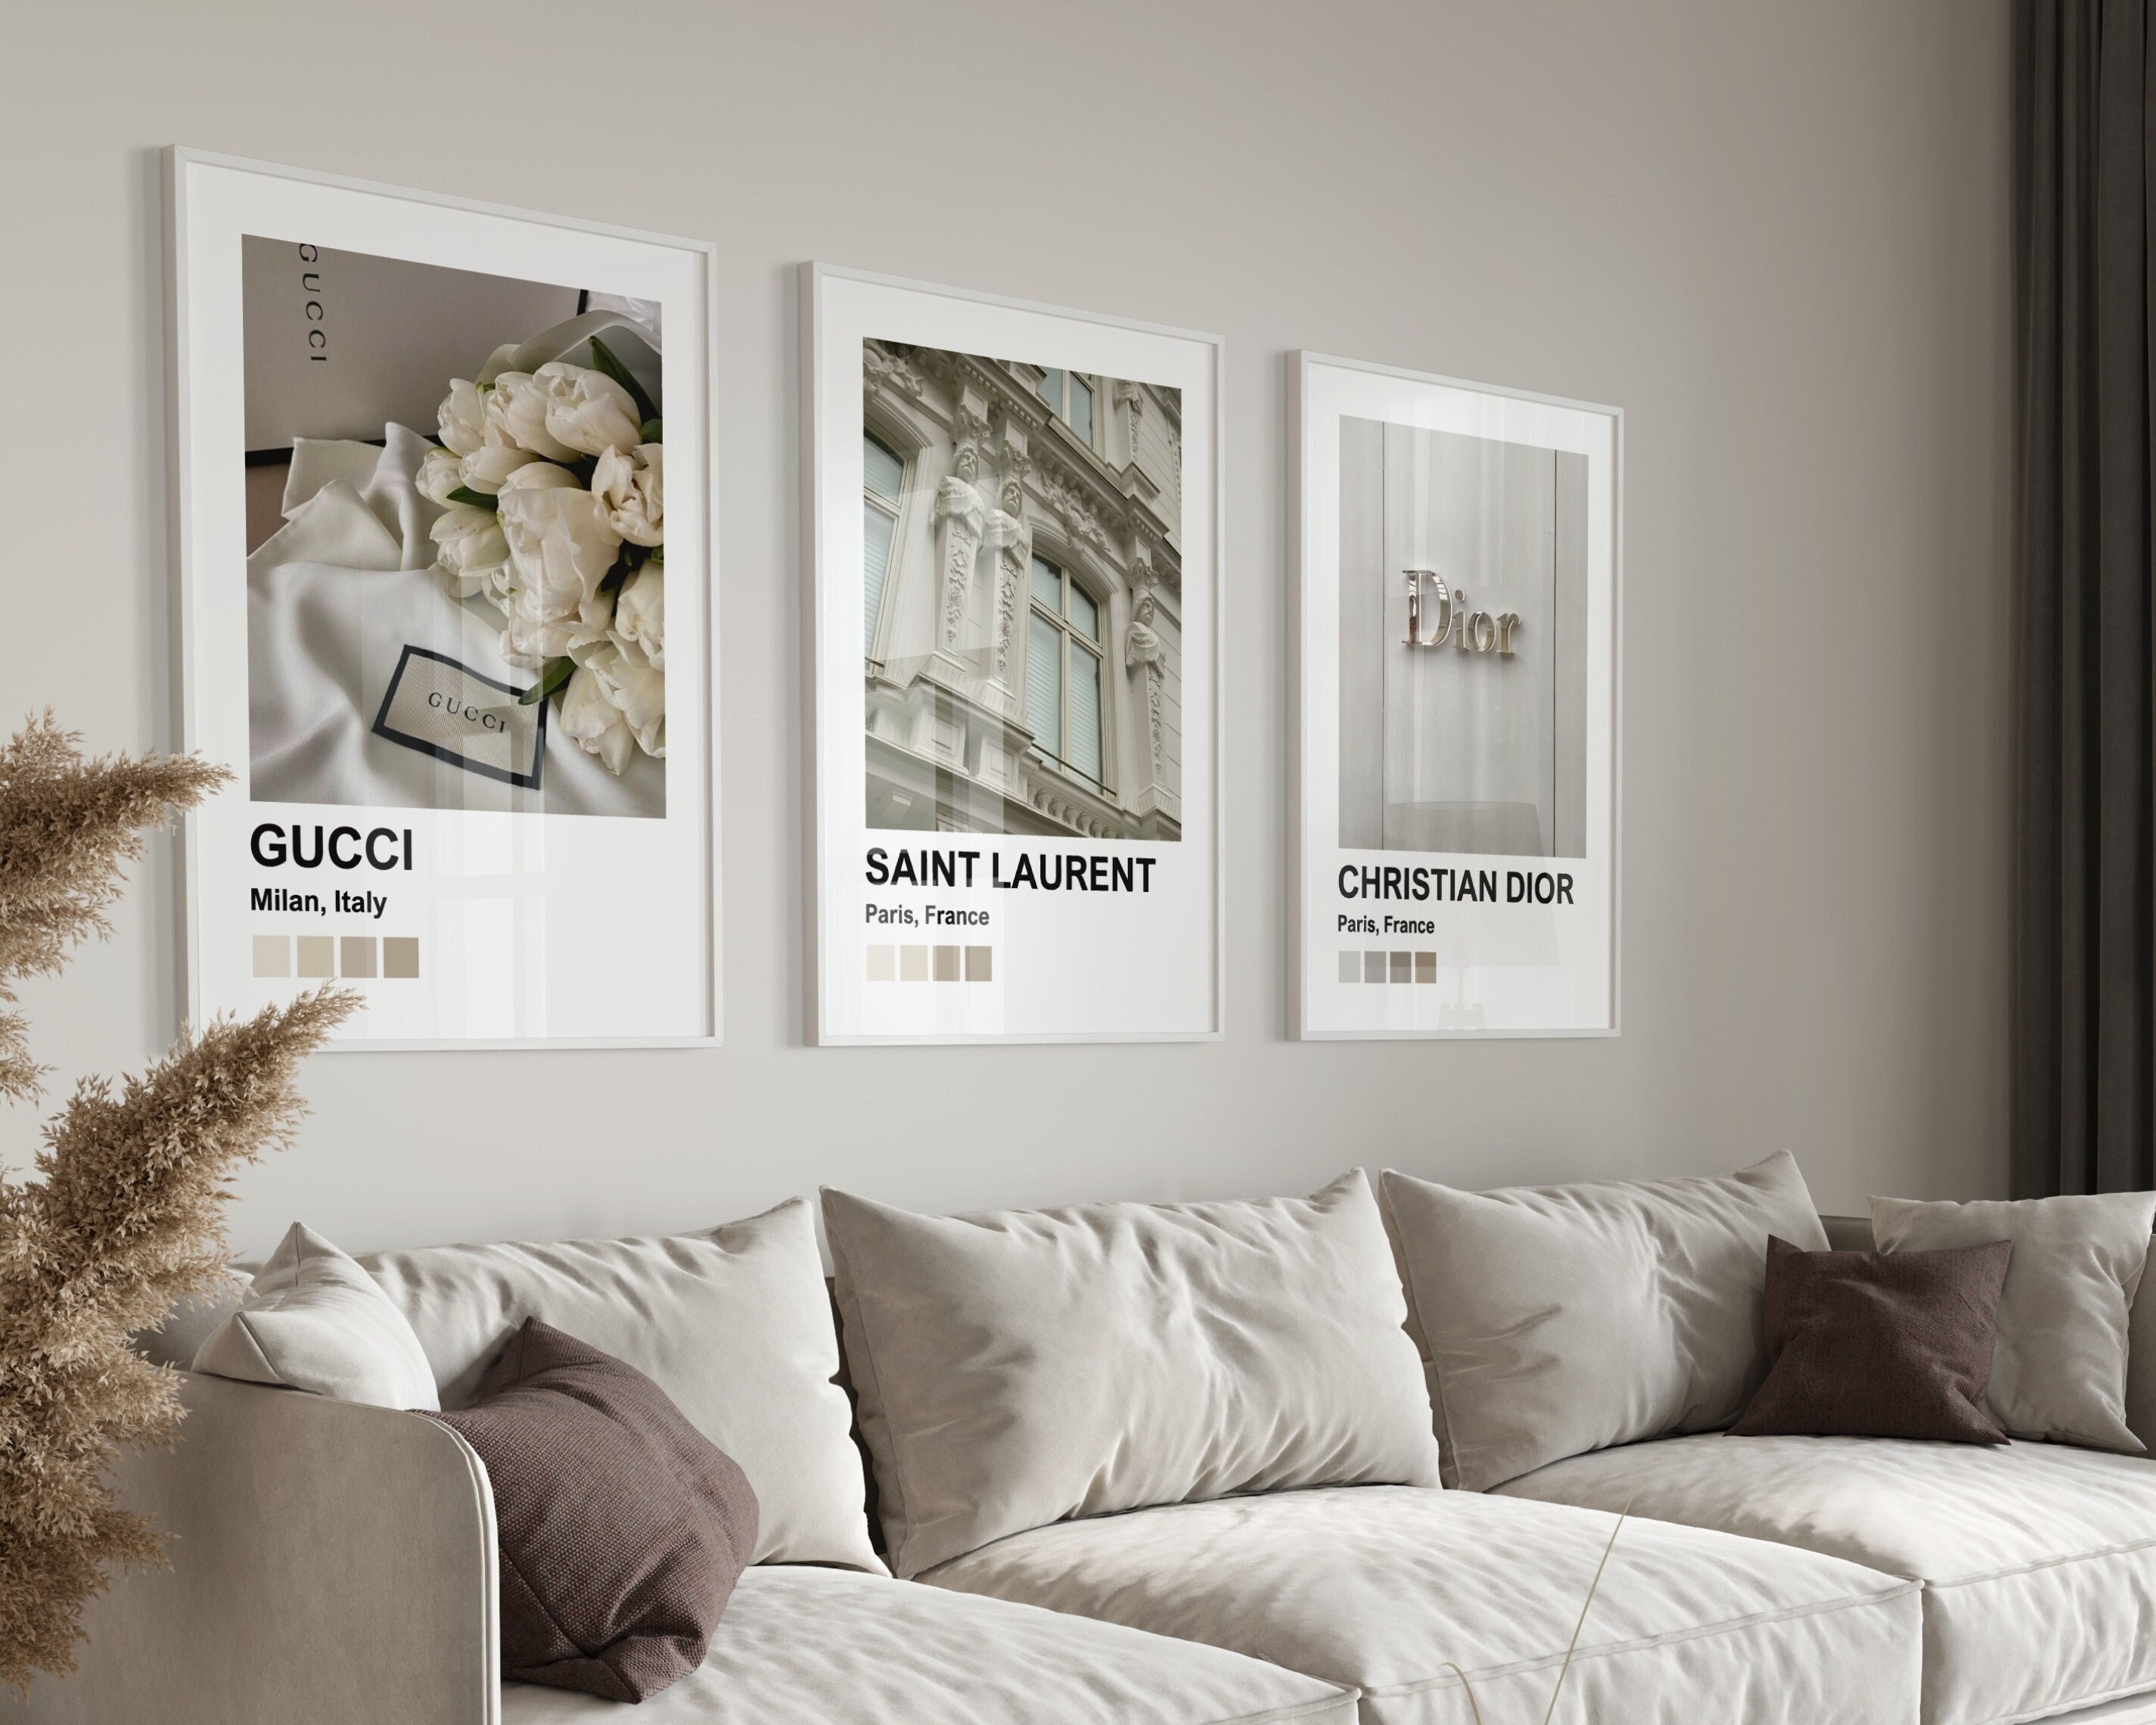 Buy Pictures of Louis Vuitton, LV, Dior, Coco Glamour Wall Art - High  Fashion Design Wall Decor Set - Glam Living Room Decor, Home Decorations -  Designer Wall Decor - Luxury Gifts